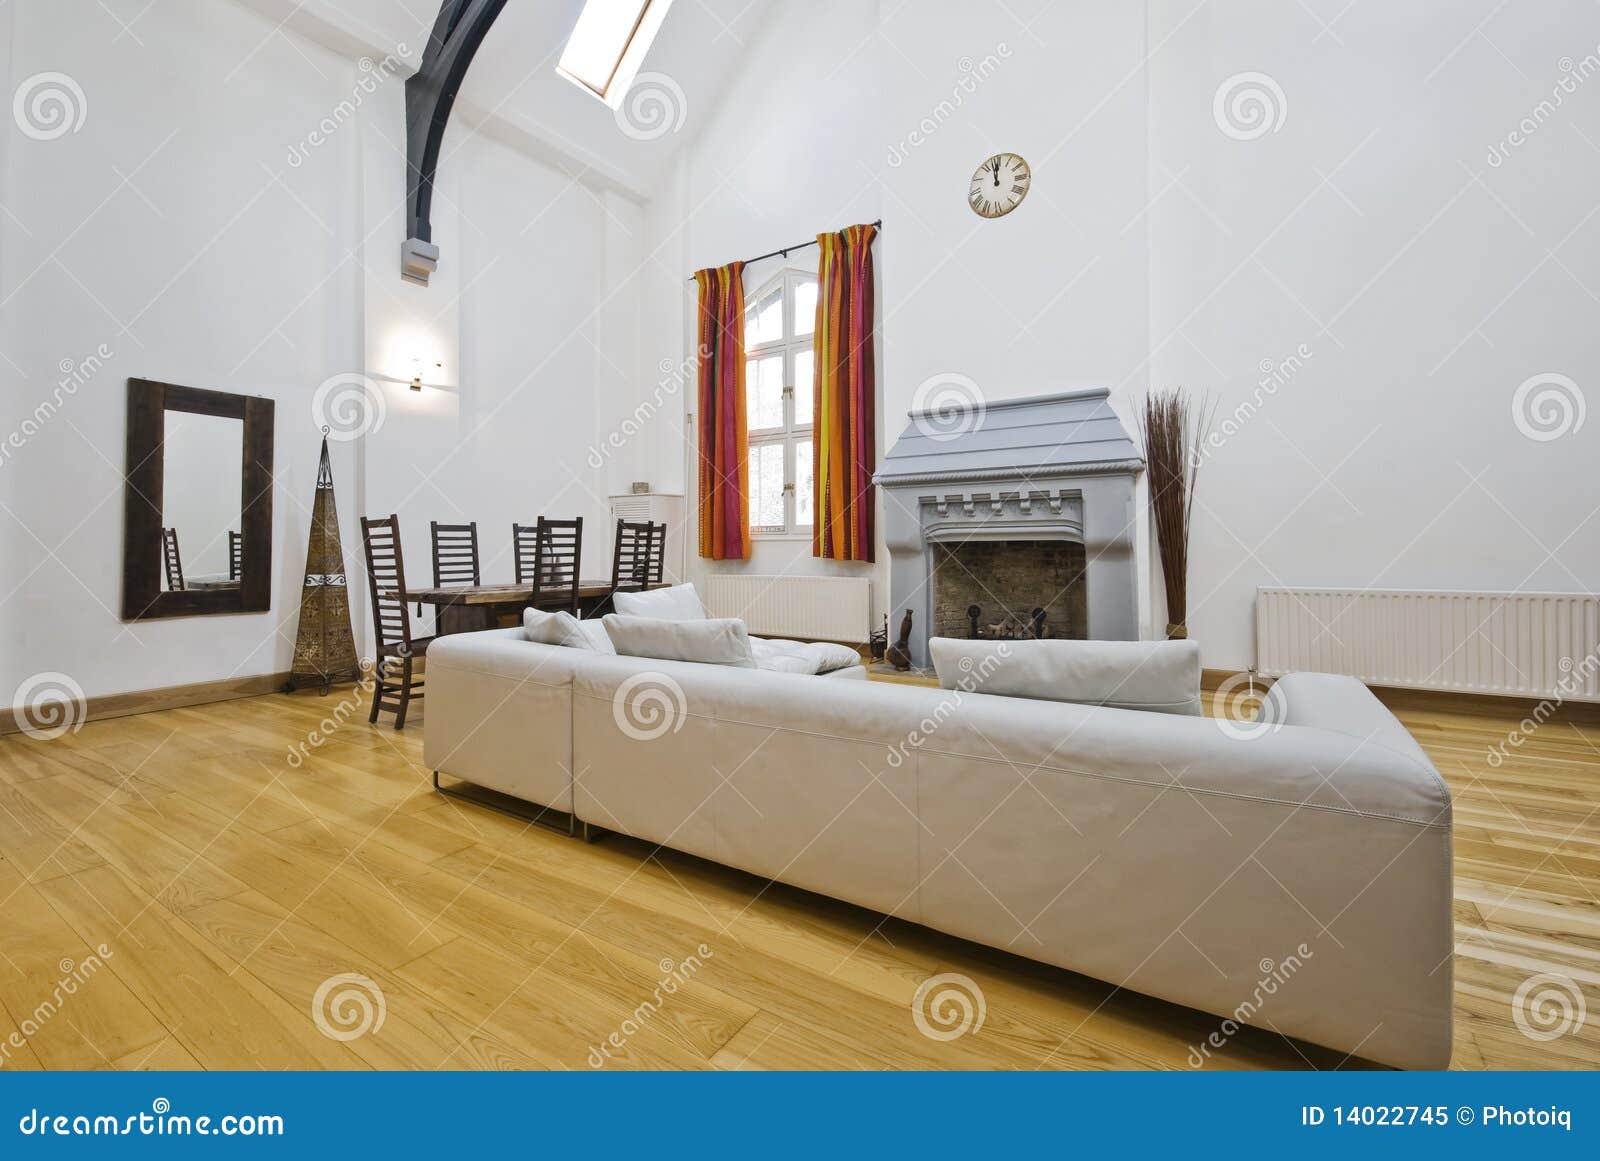 Interior With Double Height Ceiling Stock Image Image Of